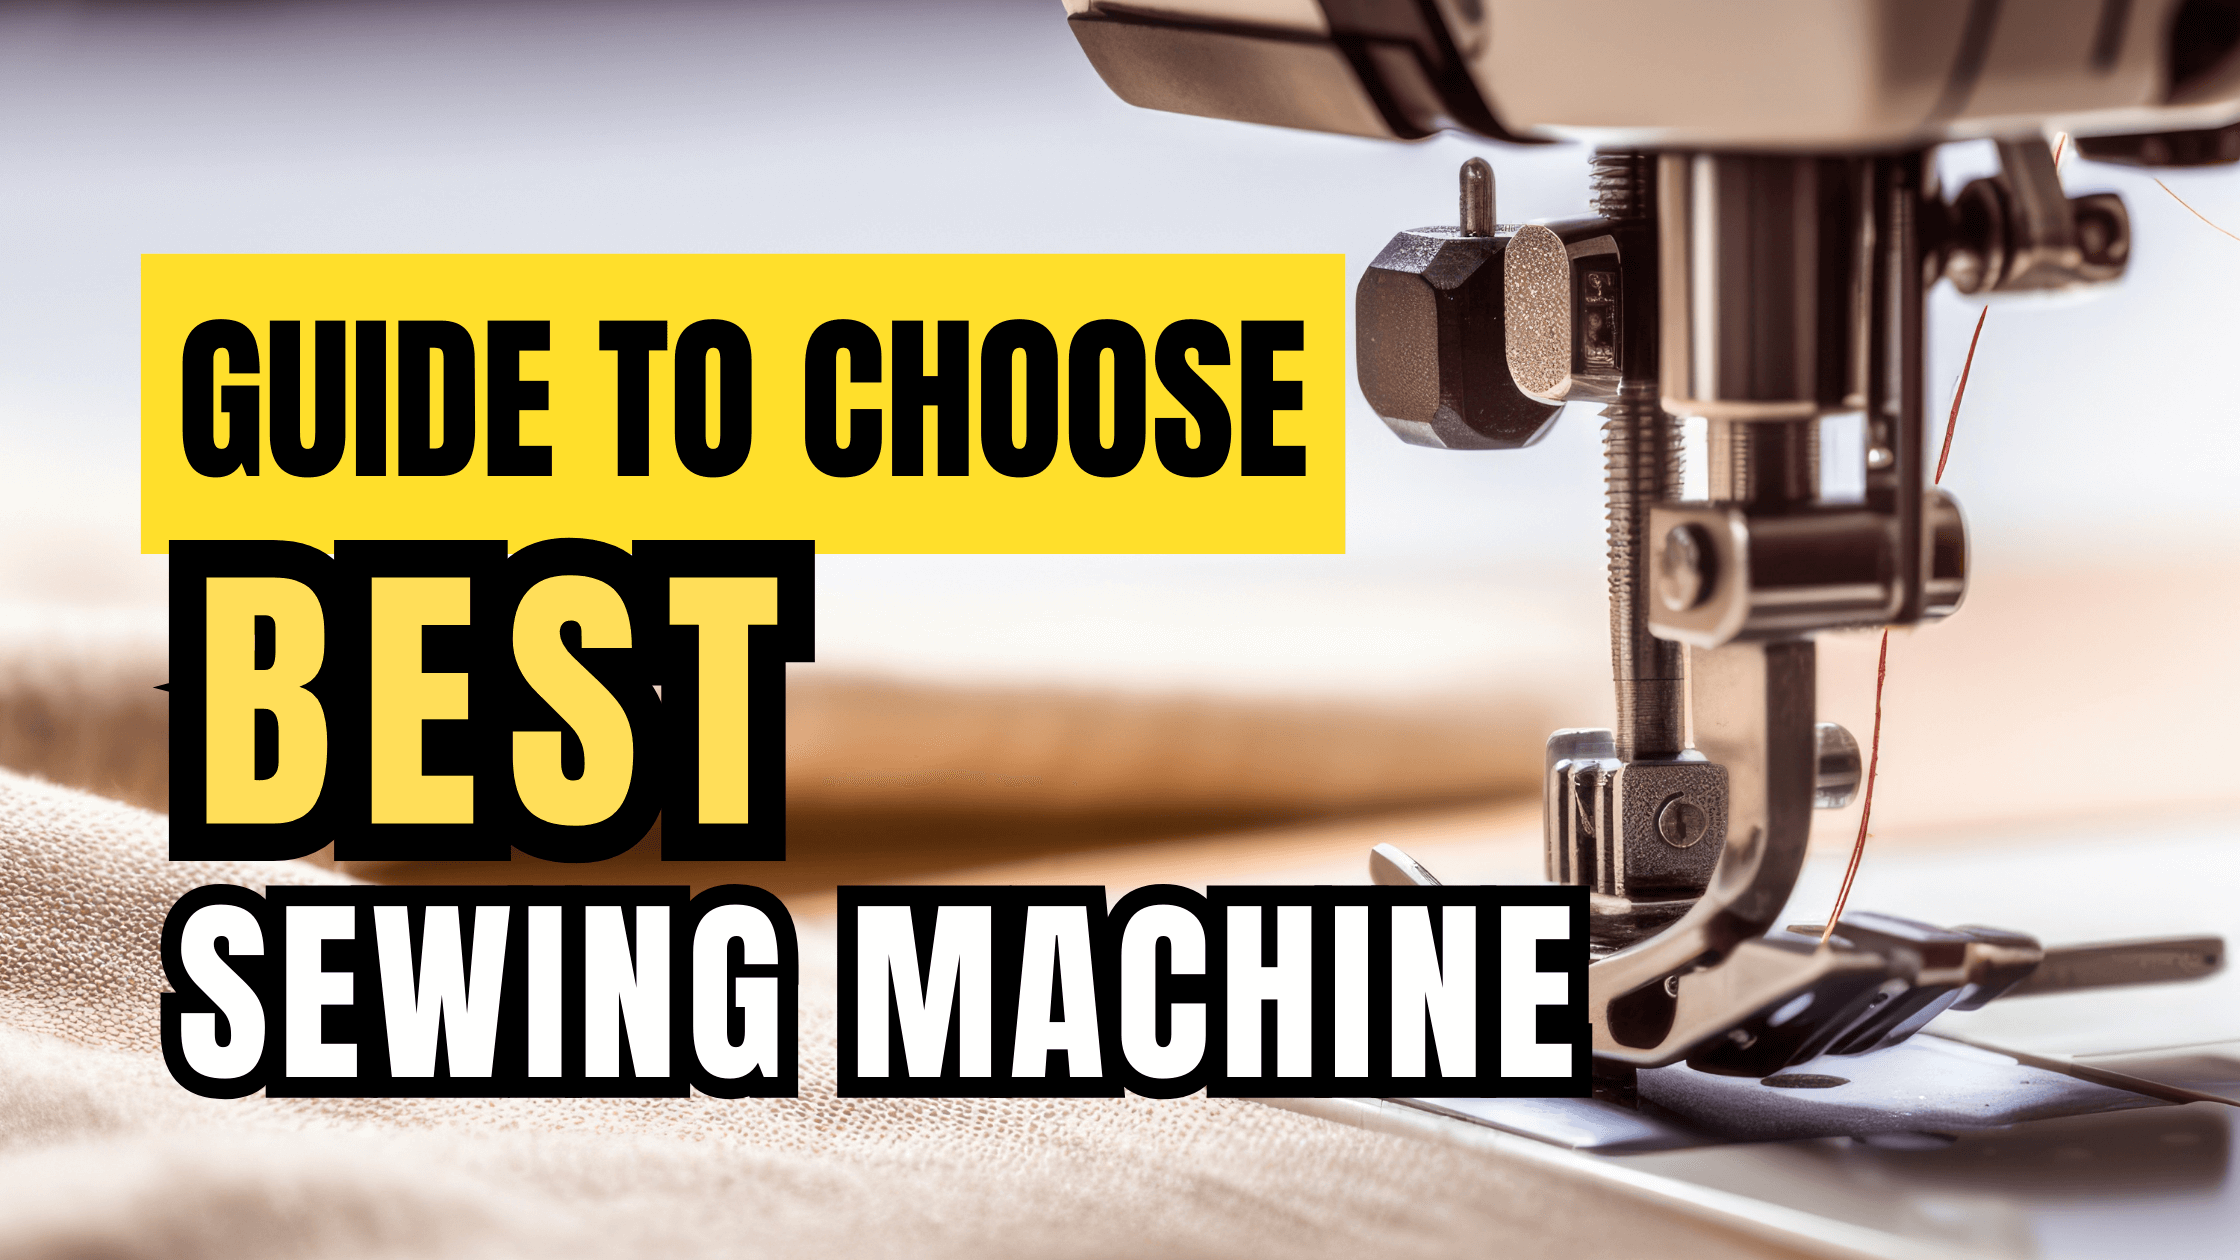 The Ultimate Guide to Choosing the Best Sewing Machine for Your Projects